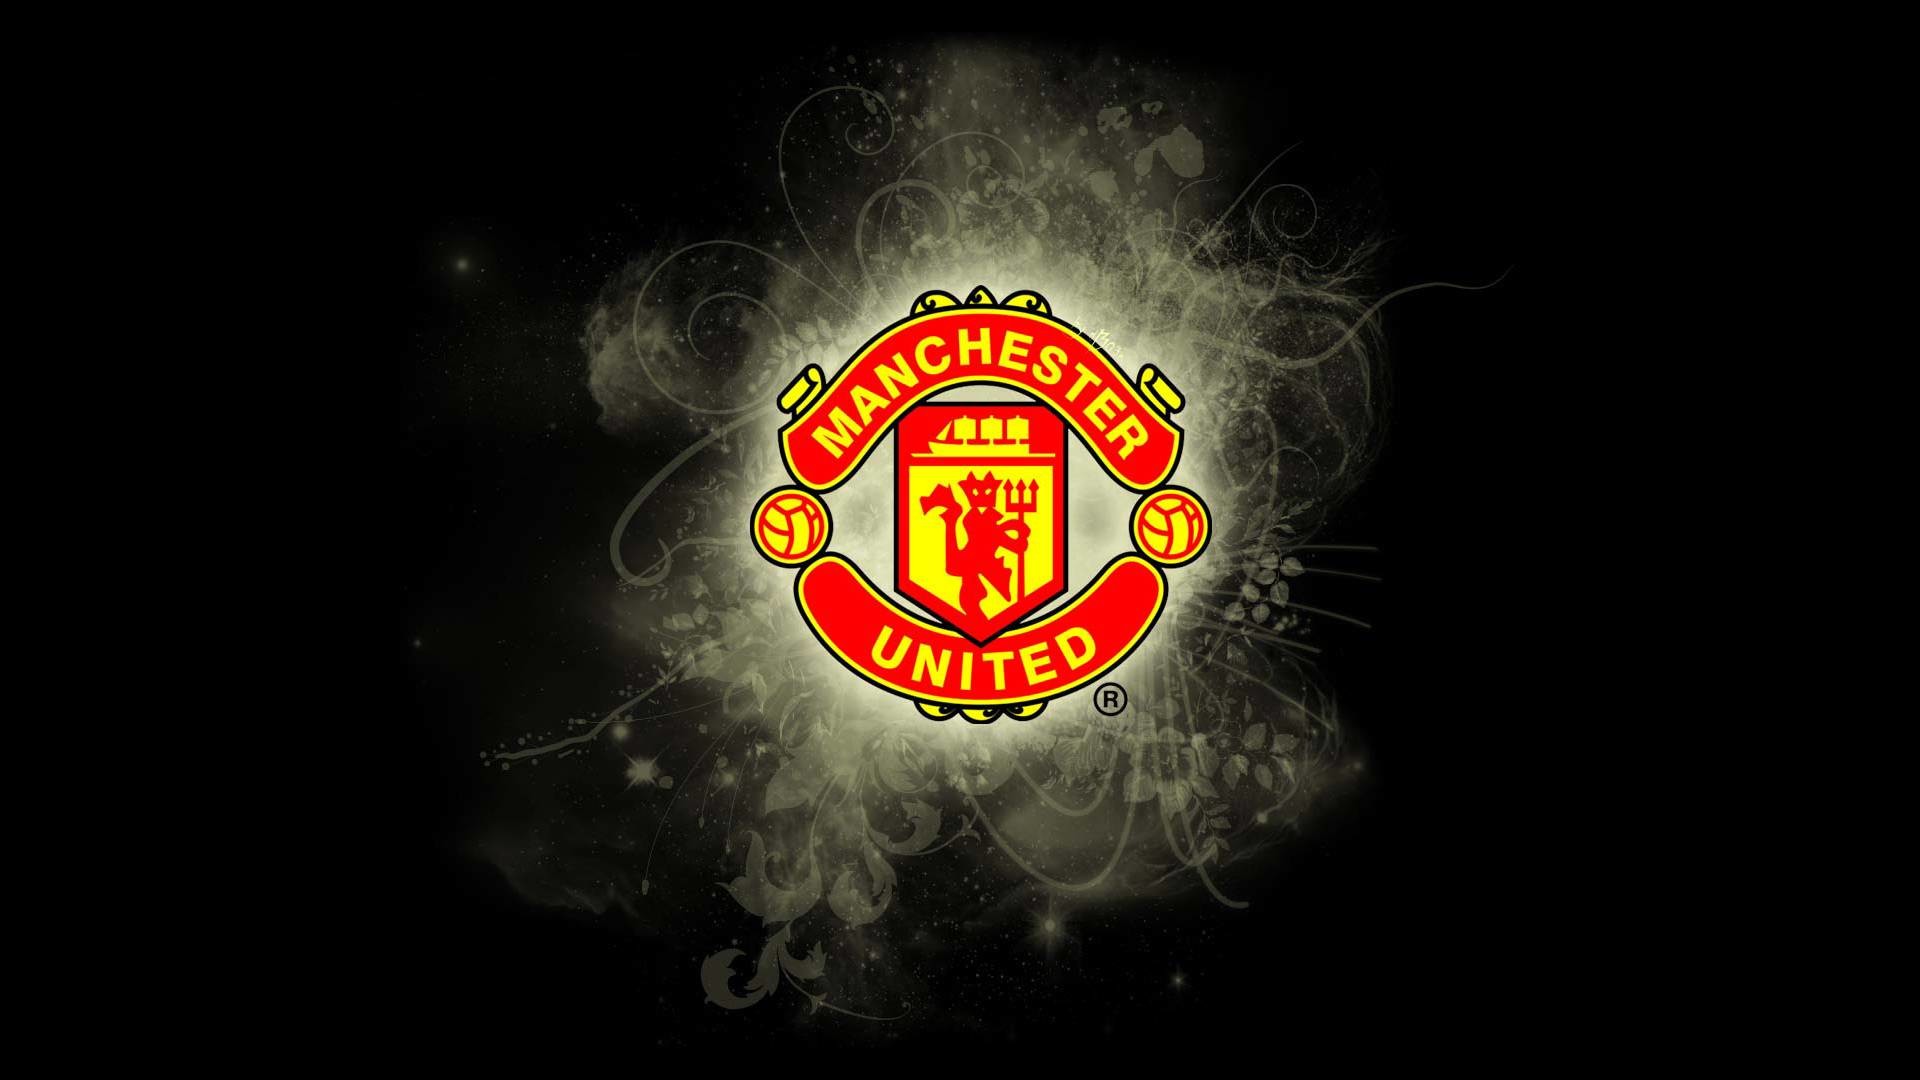 1920x1080 Manchester United Wallpaper For Iphone 4 Wallpaper | Football .